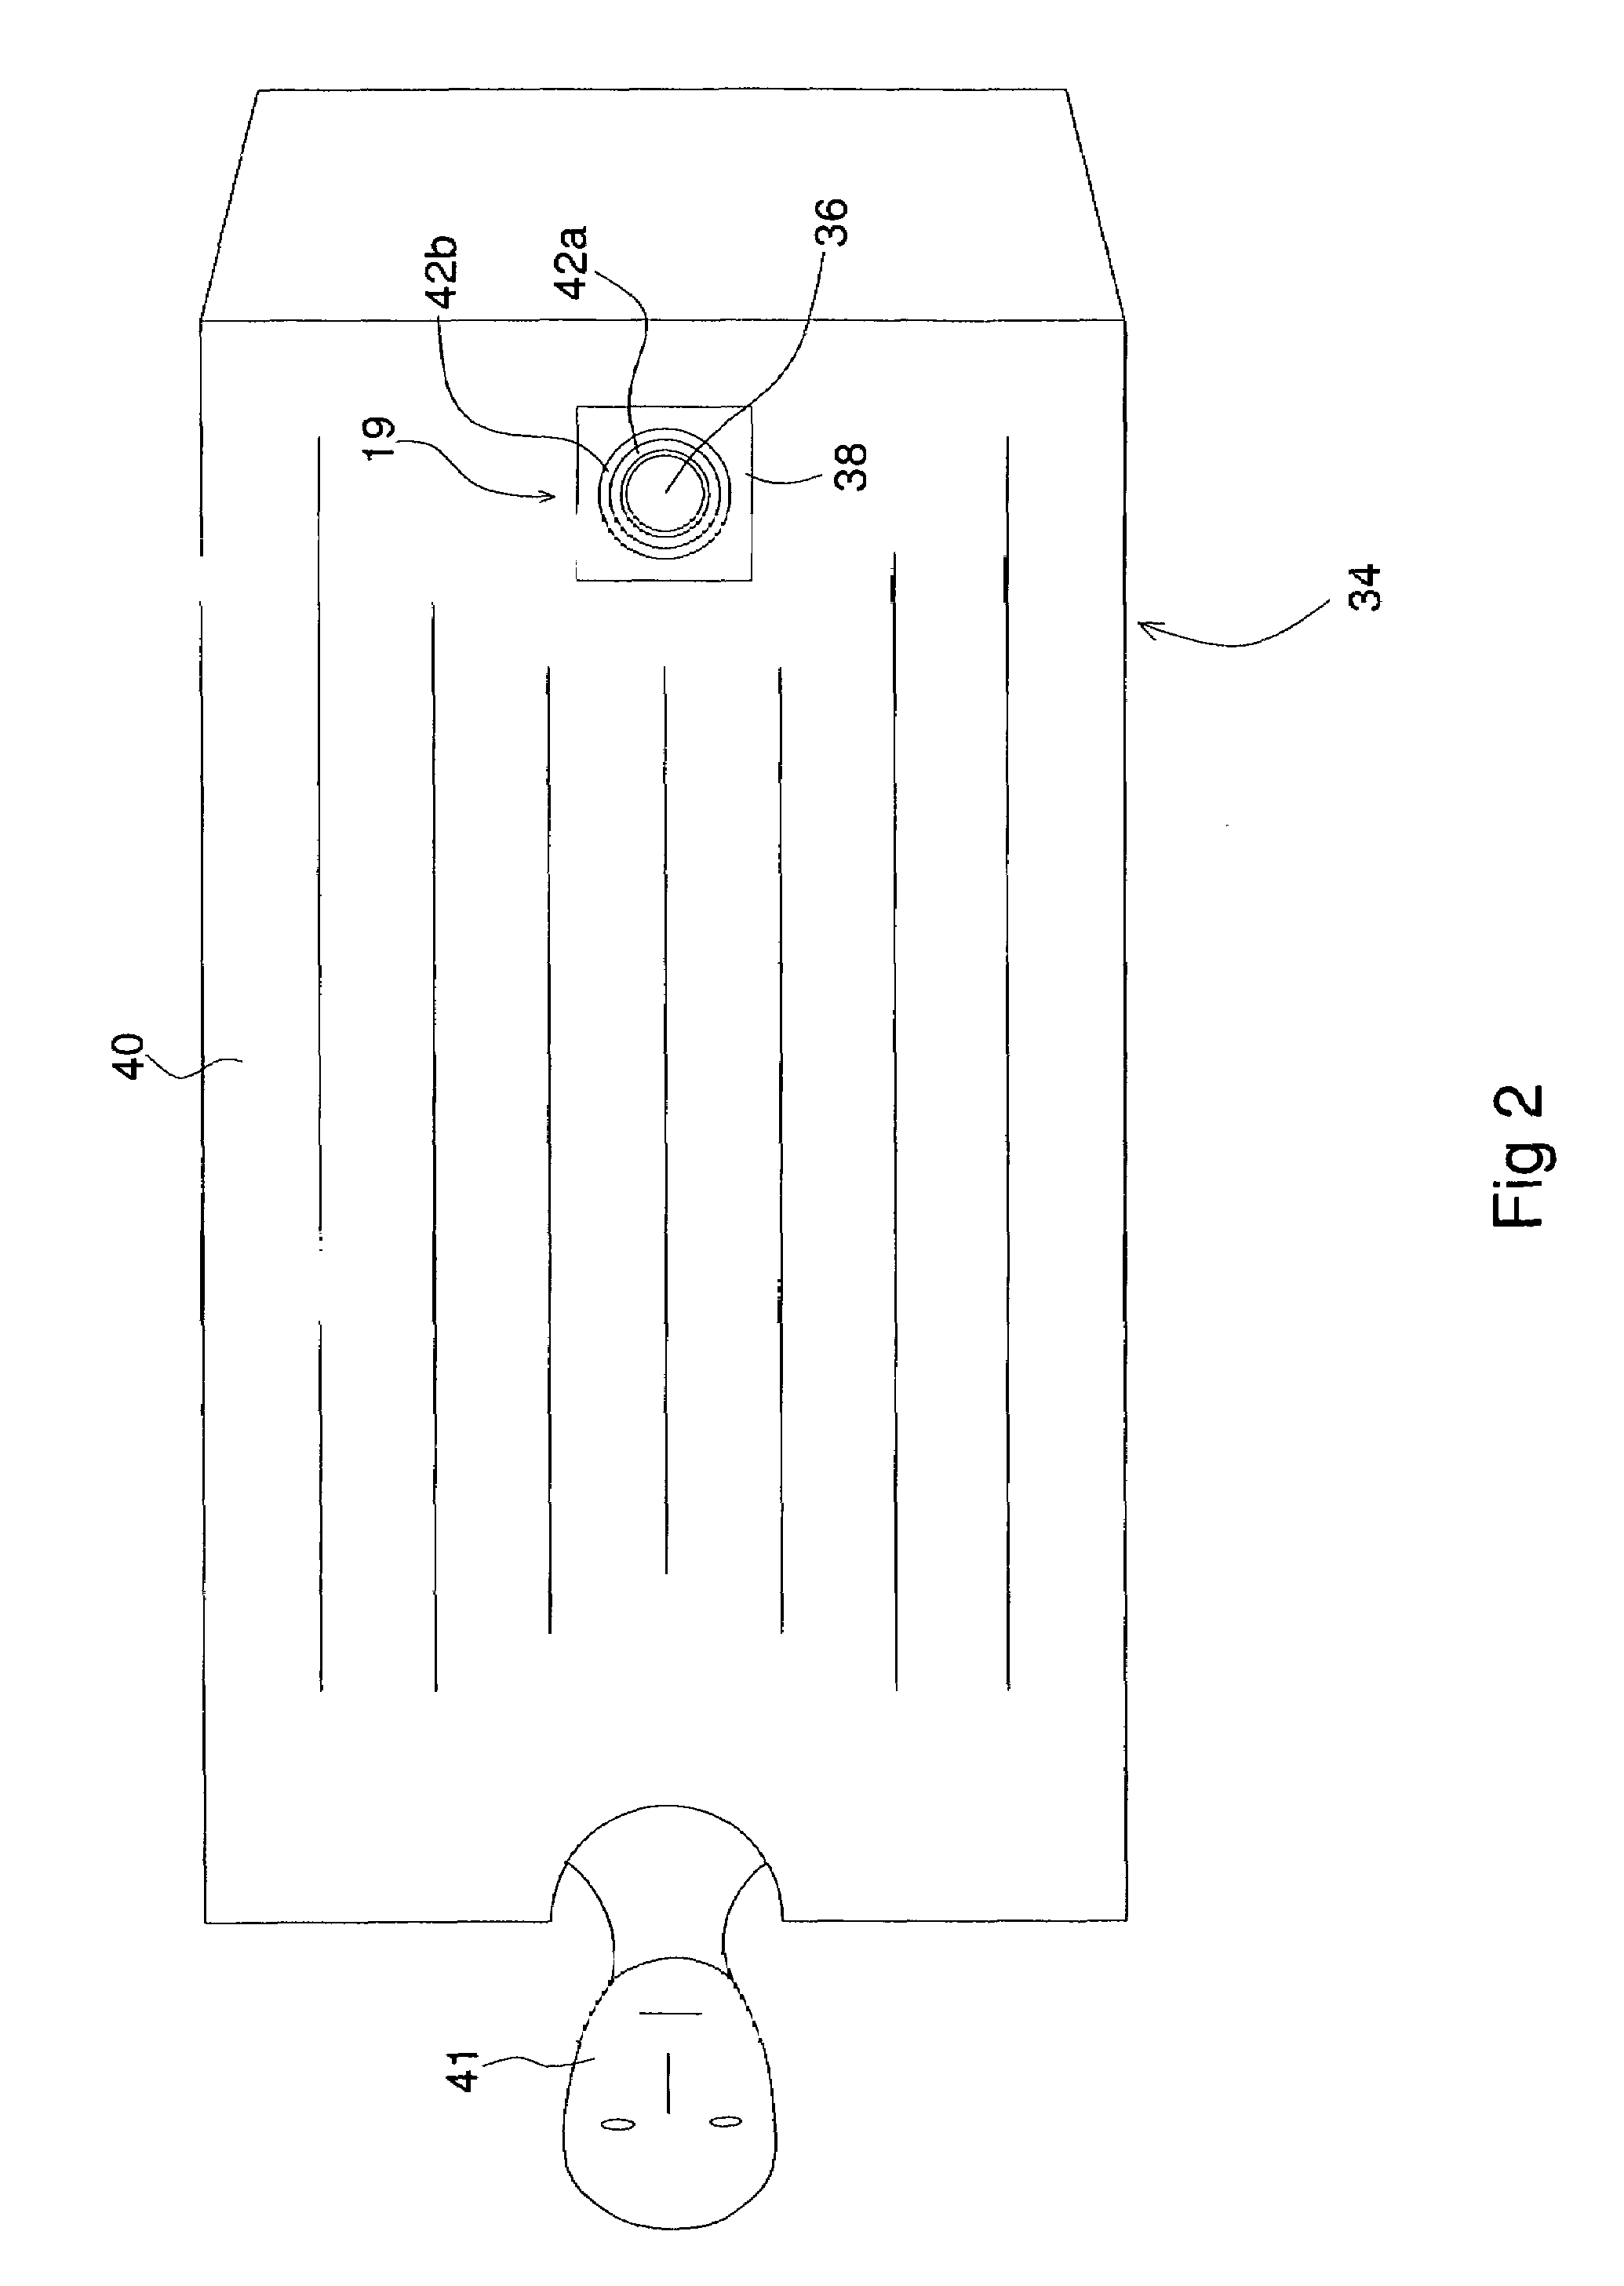 System for automatically inflating temperature regulated blankets and a blanket for coupling to the system